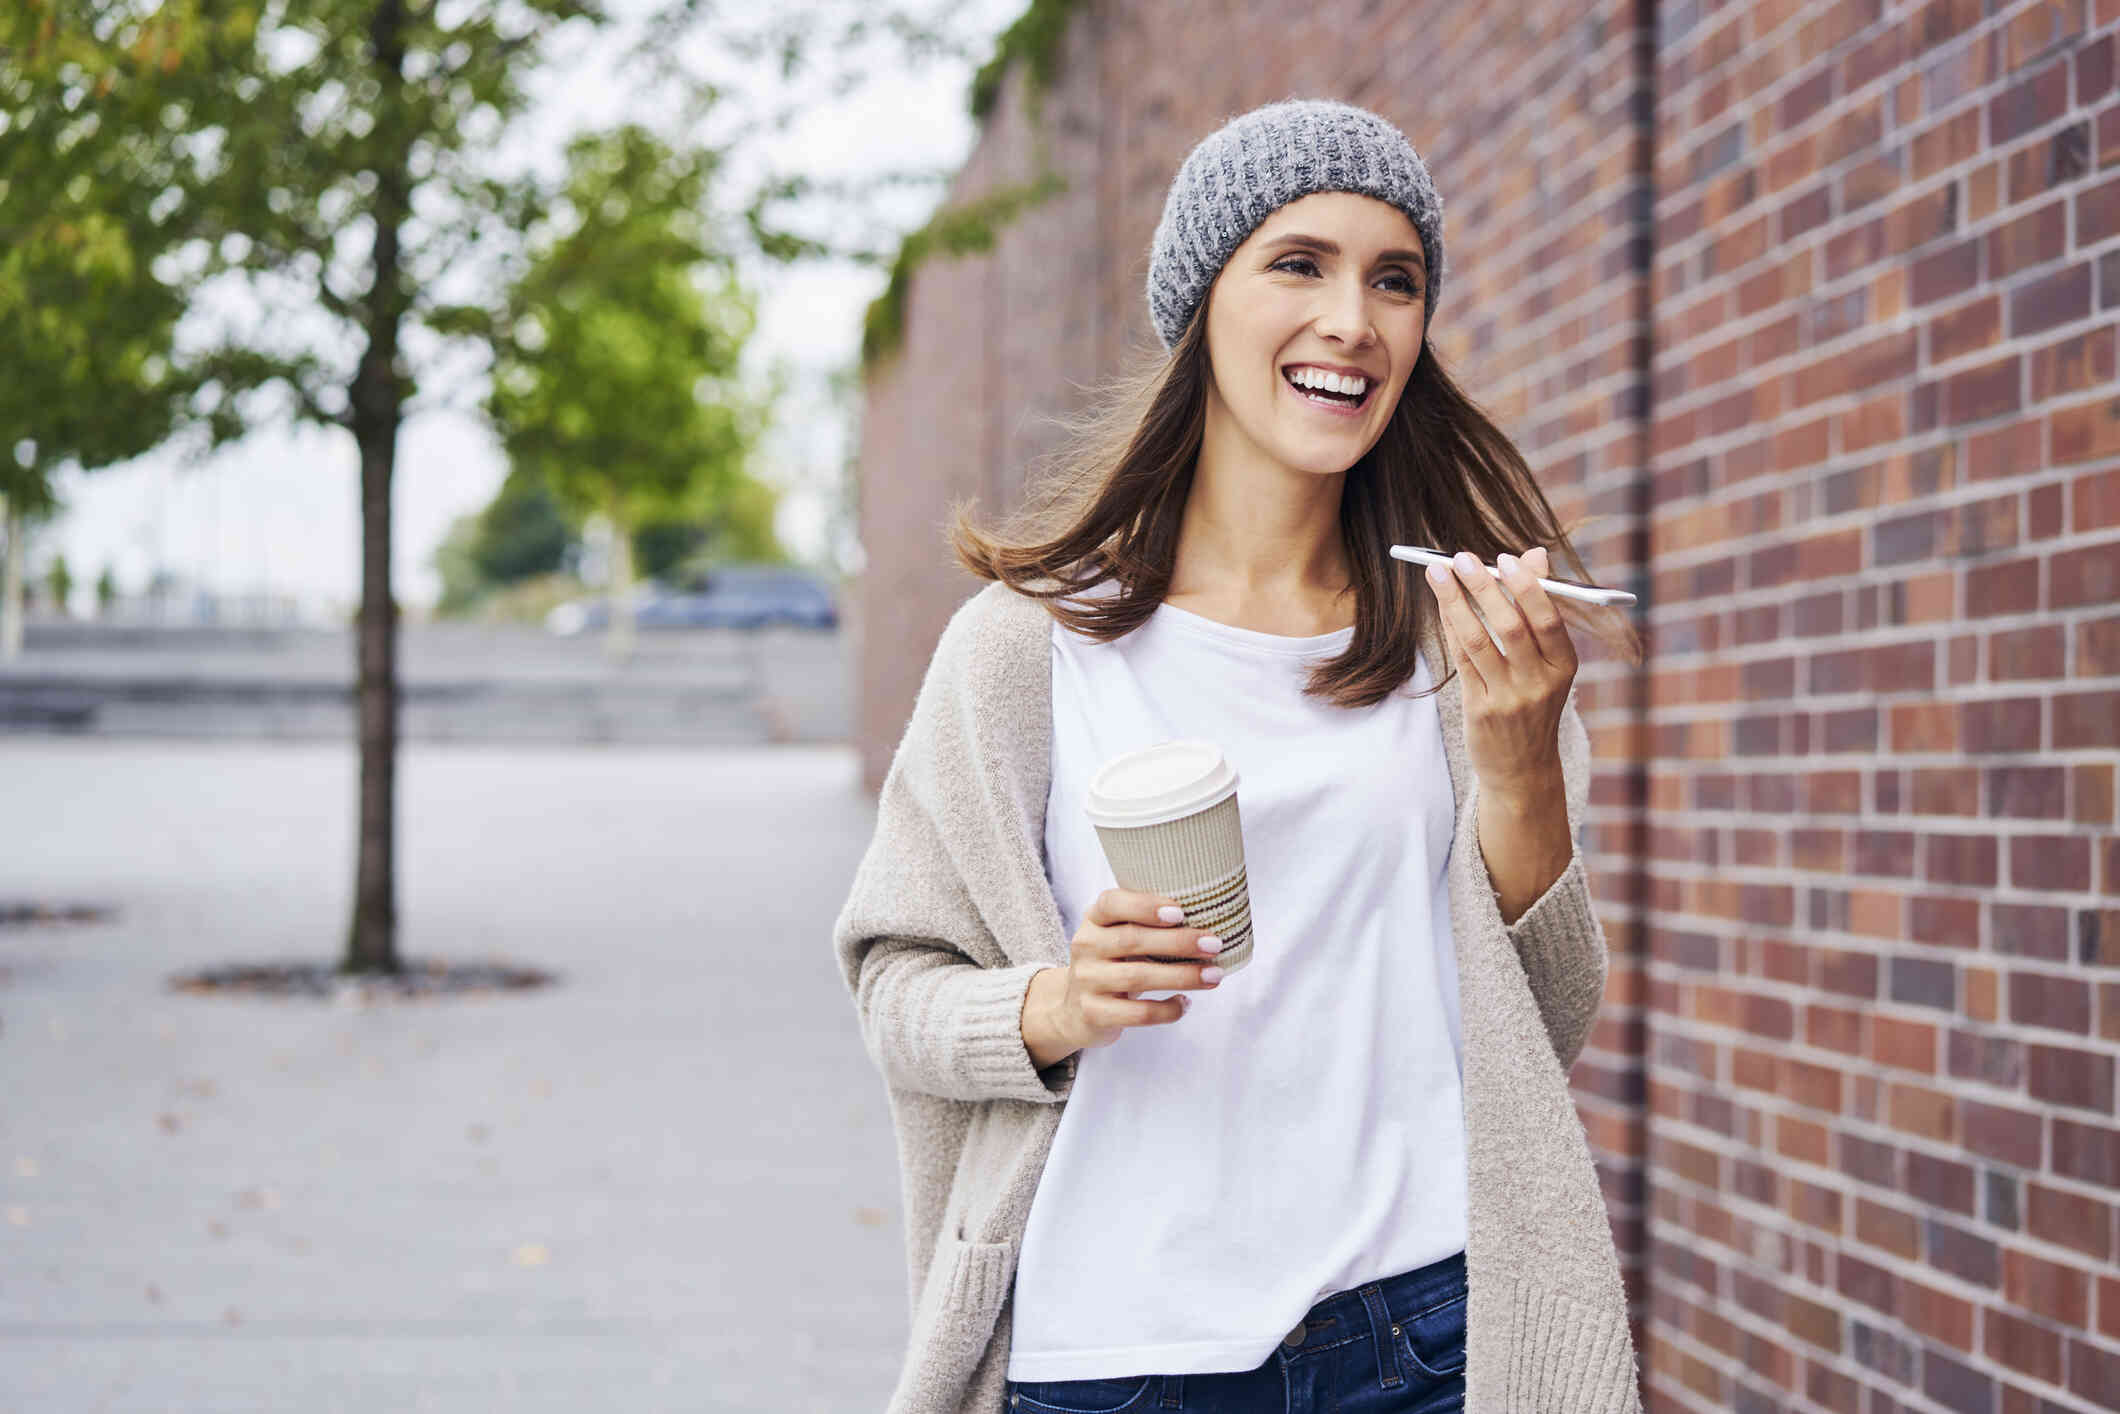 A woman in a beaning holds a cup of to go coffee in one hand and her phone in the other while talking on the phone and smiling as she walks down the sidewalk.